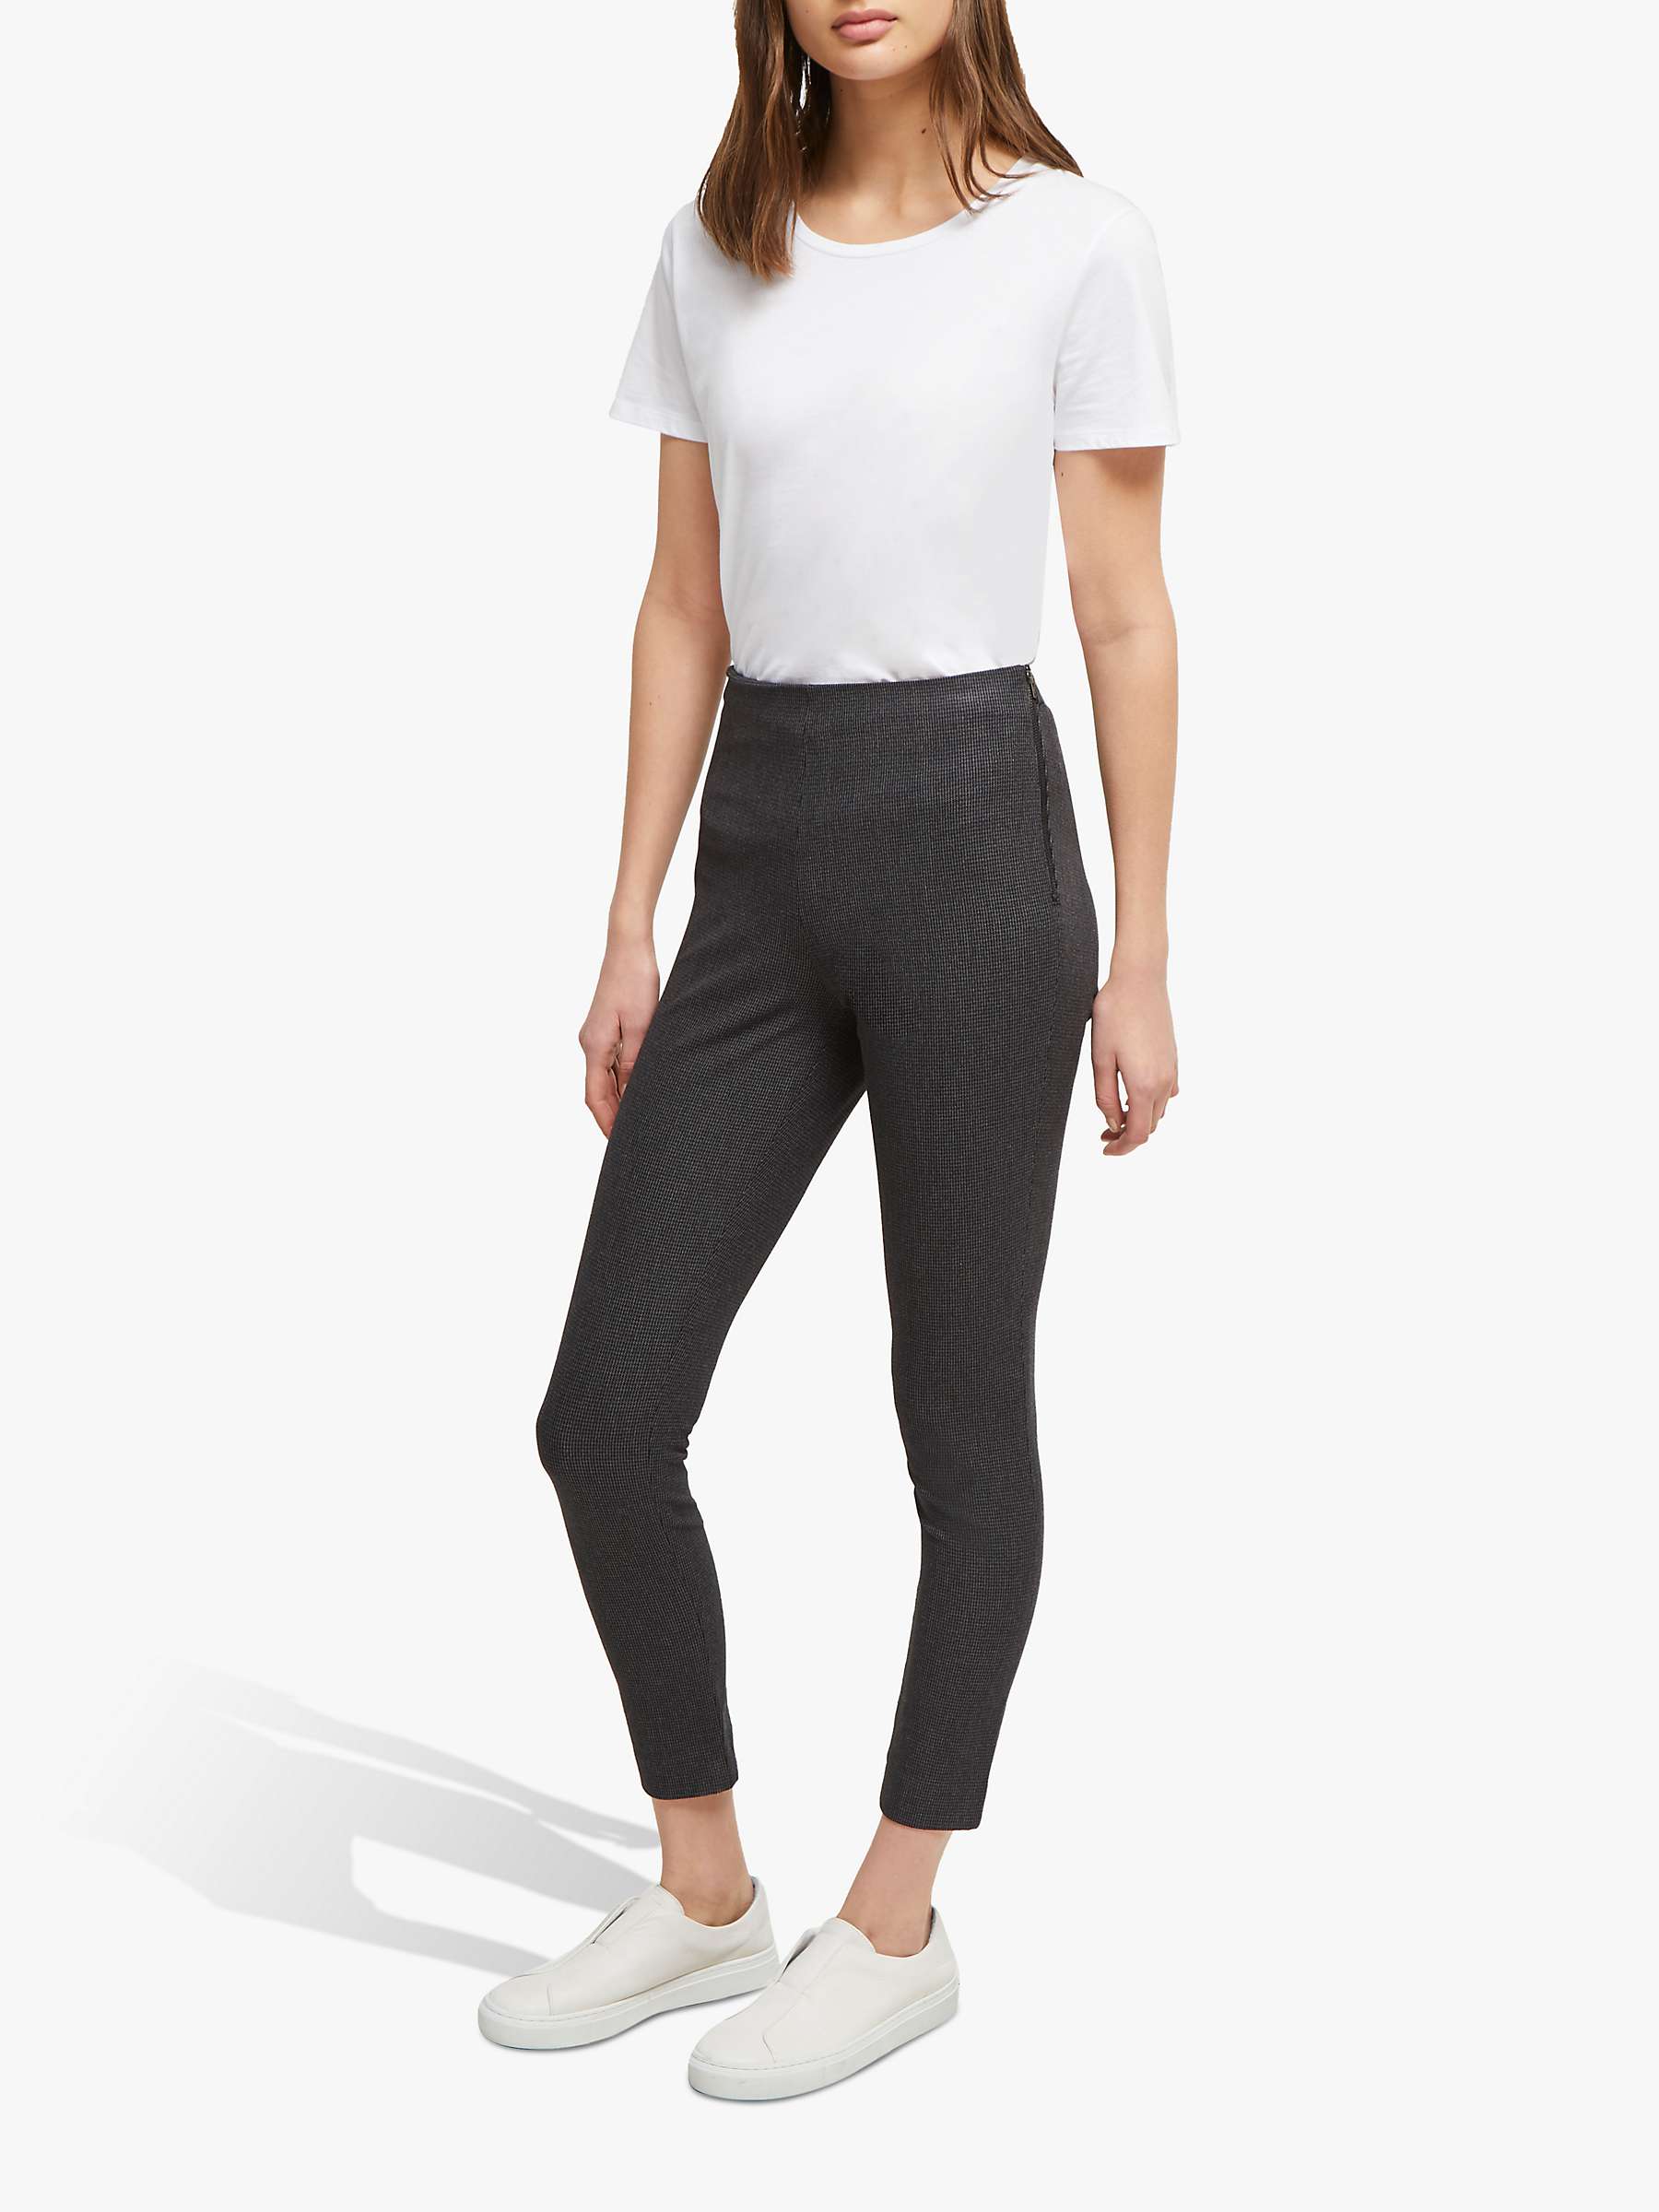 Buy French Connection Calimero Mini Dogtooth Skinny Trousers Online at johnlewis.com